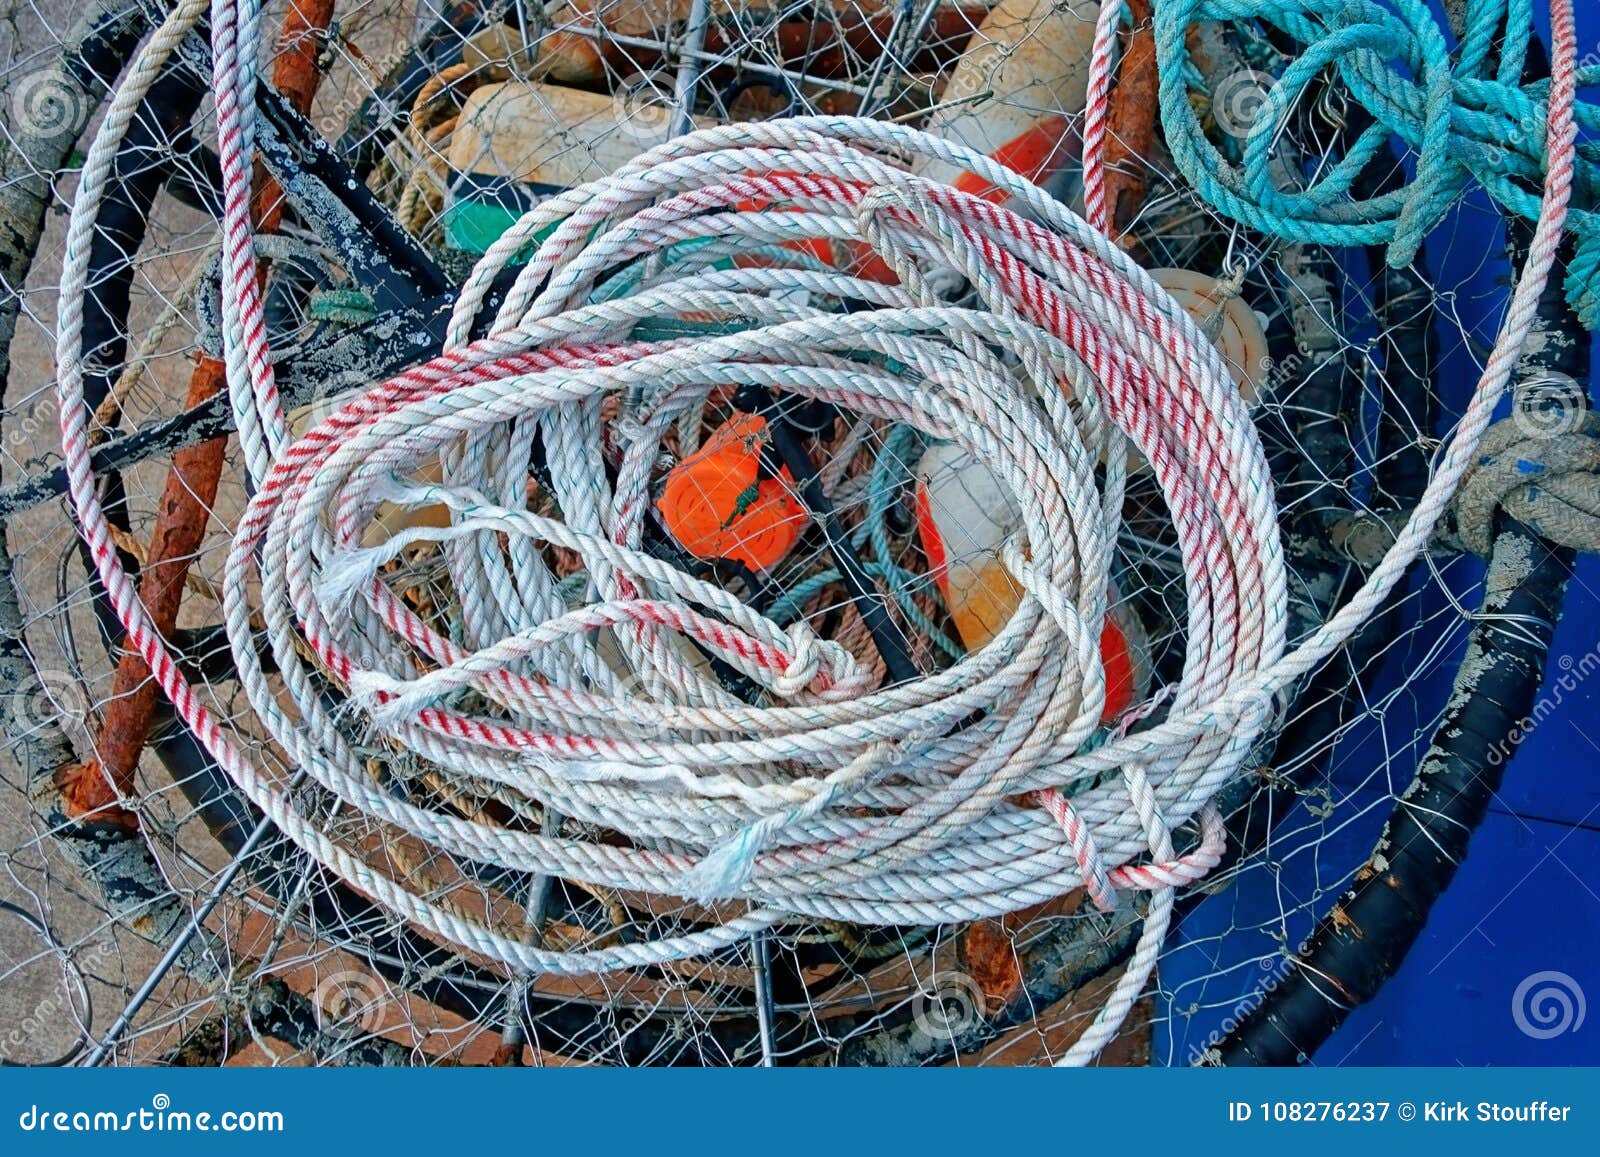 The Line To a Crab Pot Sitting on Top of it. Stock Image - Image of trap,  fish: 108276237